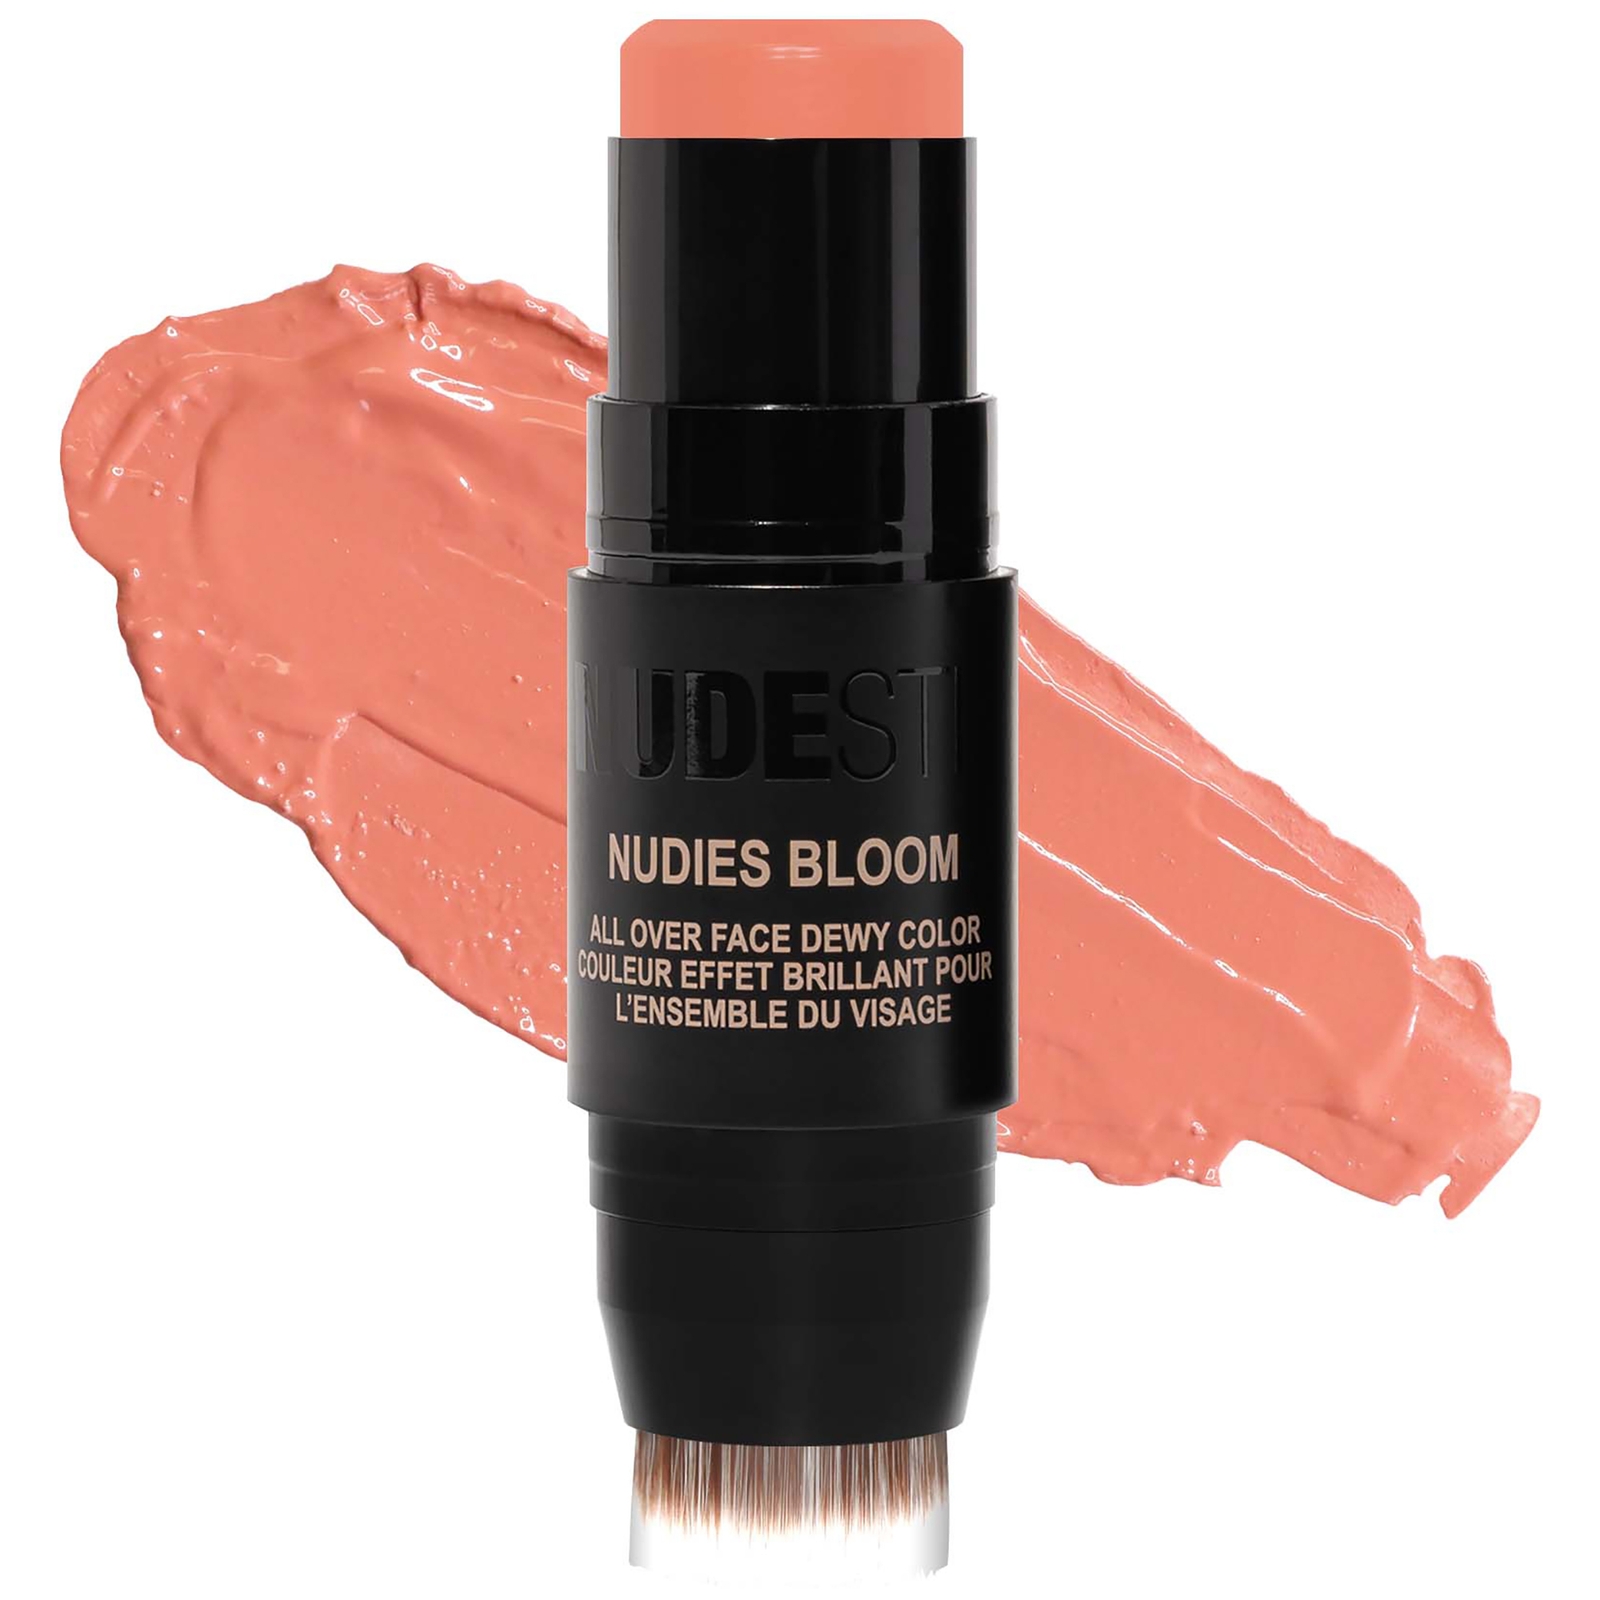 Image of NUDESTIX Nudies Bloom All Over Face Dewy Blush Colour 7g (Various Shades) - Sweet Peach Peony